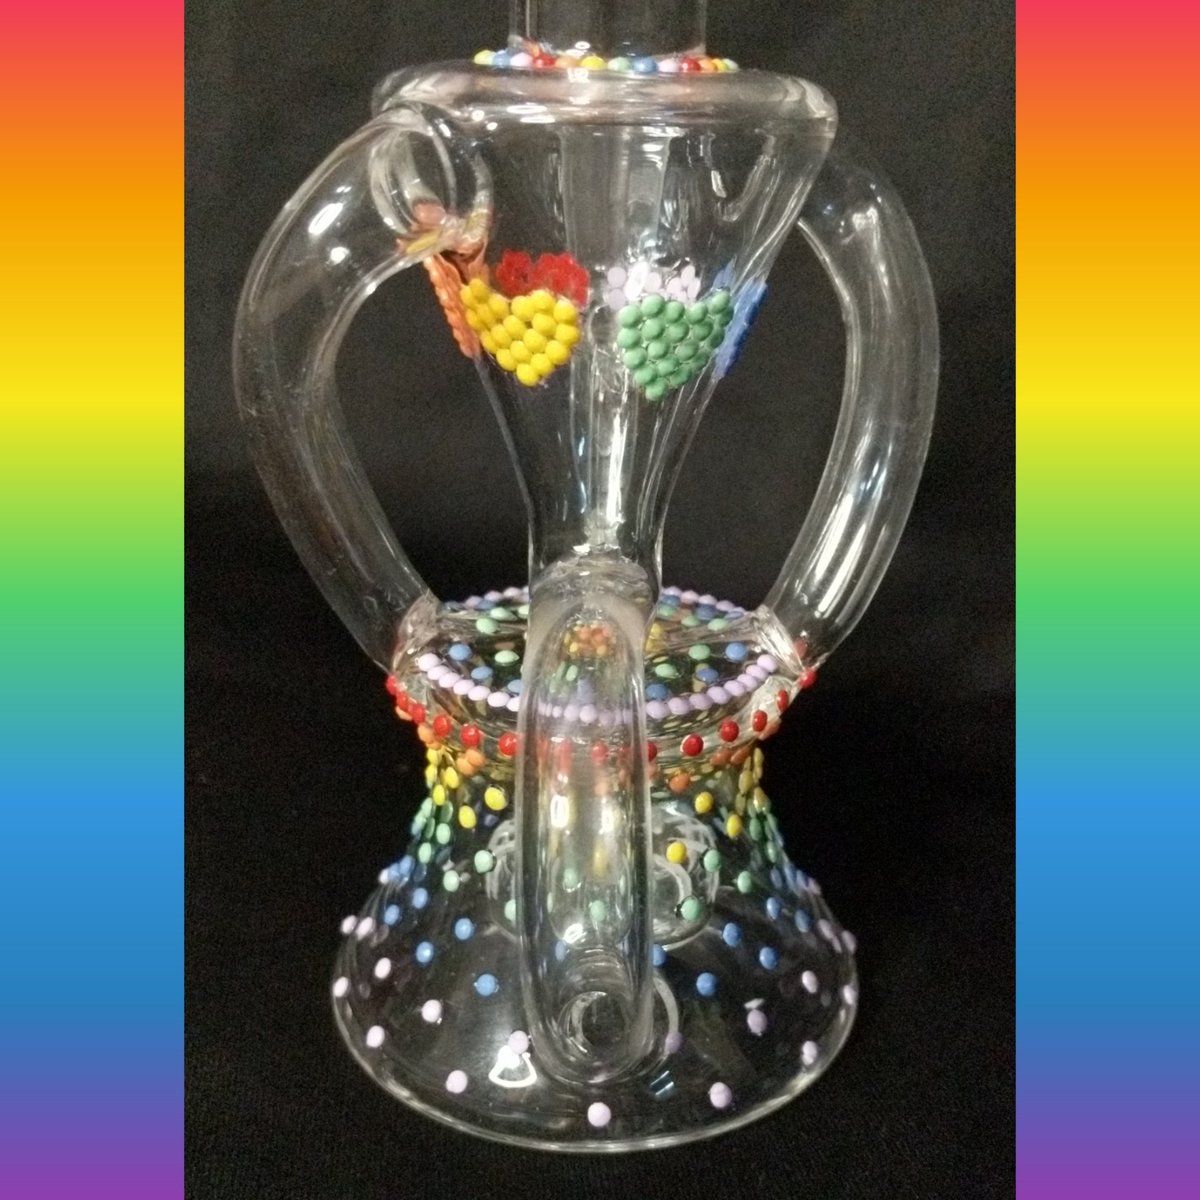 RAFFLE TIME!!❤️ To celebrate #pride this month I will be doing 2 rainbow raffles! The first is this beautiful Rainbow Dab Rig 🧡 Only $3 per entry, no entry limits! 💚
#raffle #420fam #cannabis #pridemonth #rainbow #dabrig #dabrigs #rainbowglass #happypridemonth #loveislove